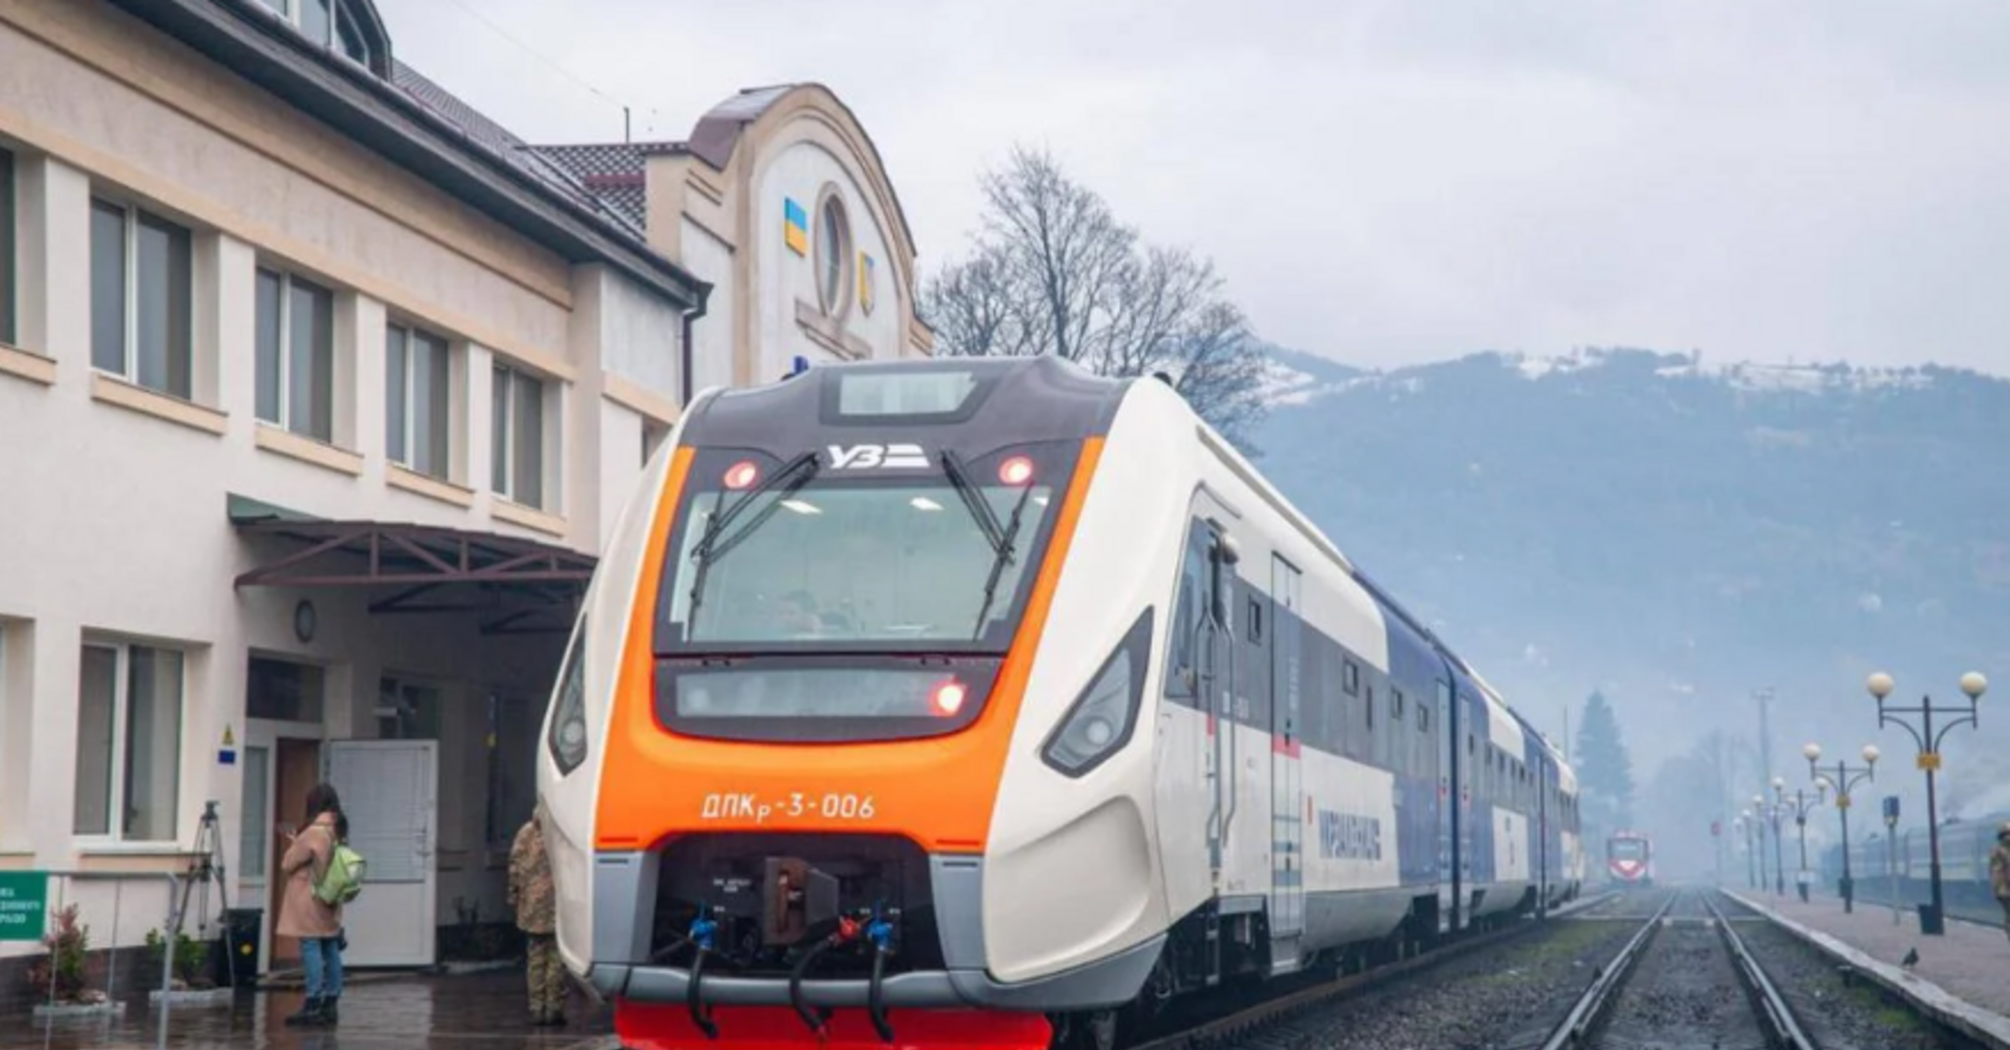 A new train to Slovakia will be launched from Kyiv